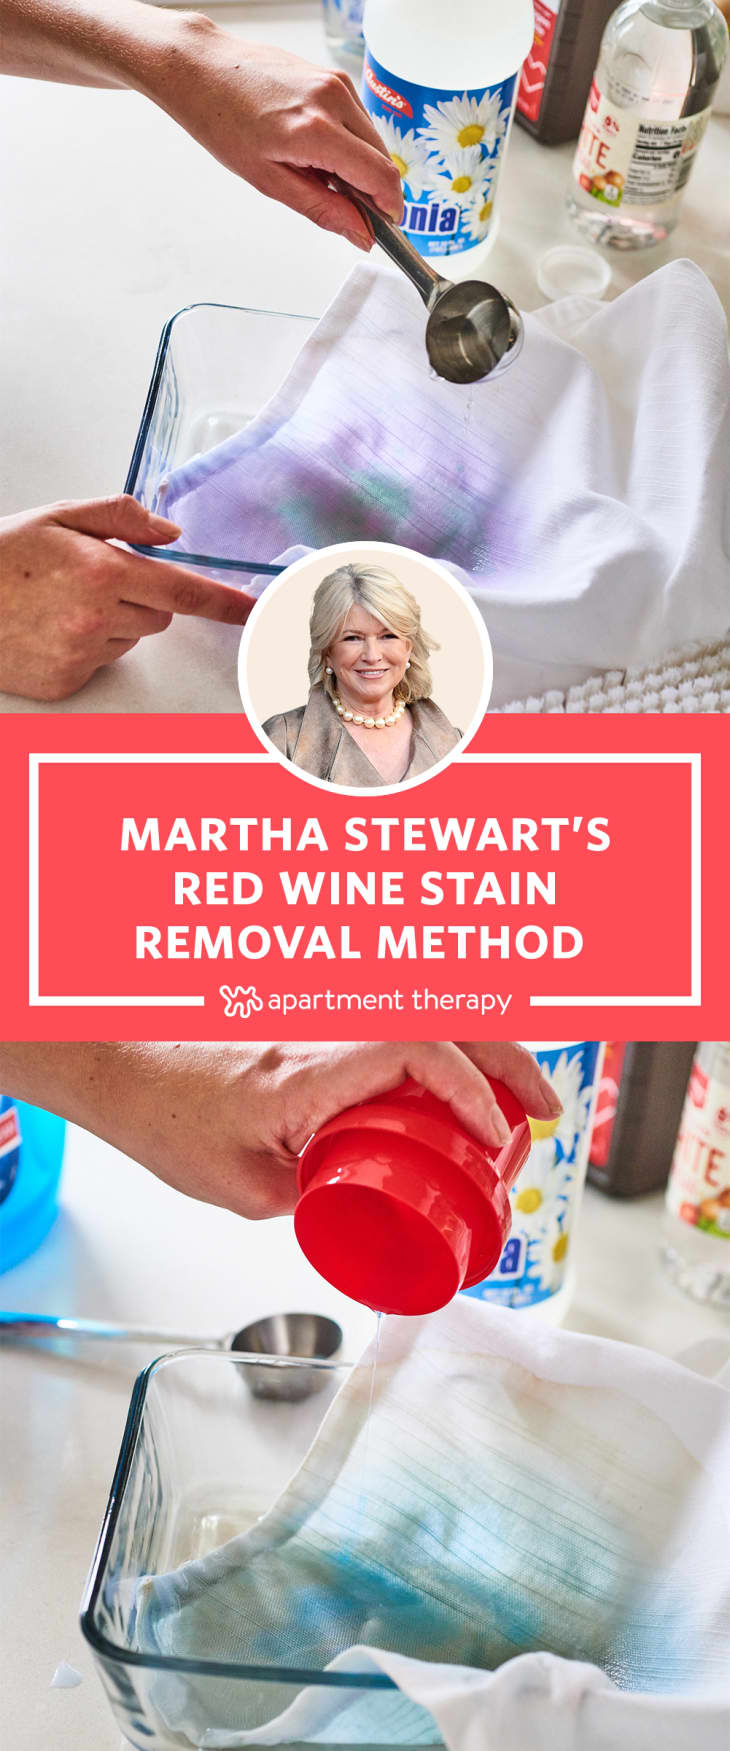 Martha Stewart's Red Wine Stain Removal Method | Therapy